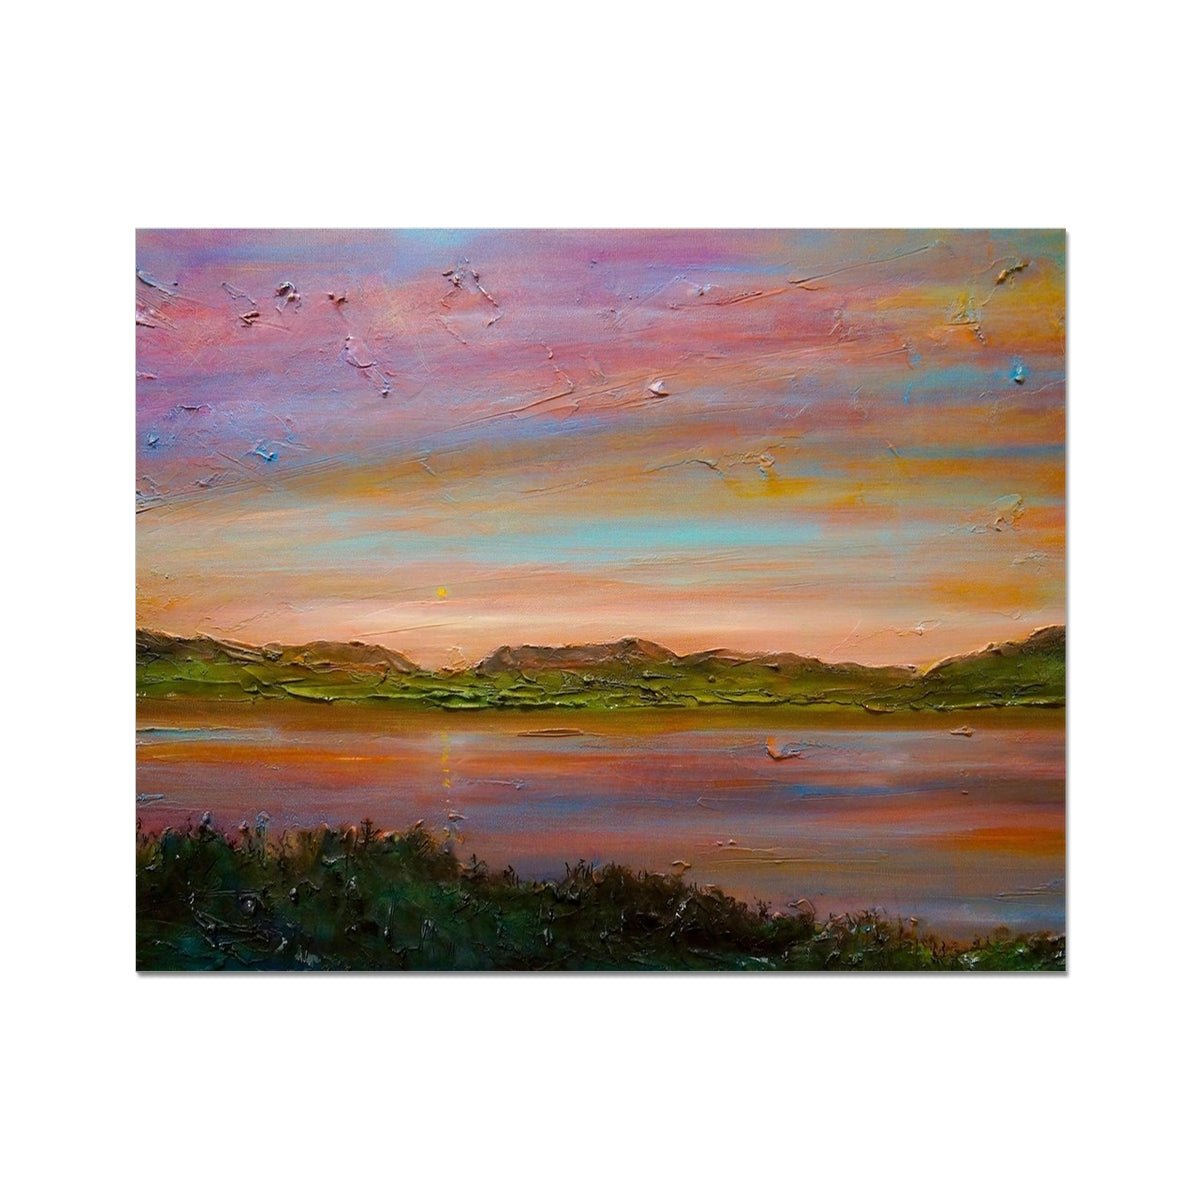 Gourock Golf Club Sunset Painting | Artist Proof Collector Prints From Scotland-Artist Proof Collector Prints-River Clyde Art Gallery-20"x16"-Paintings, Prints, Homeware, Art Gifts From Scotland By Scottish Artist Kevin Hunter